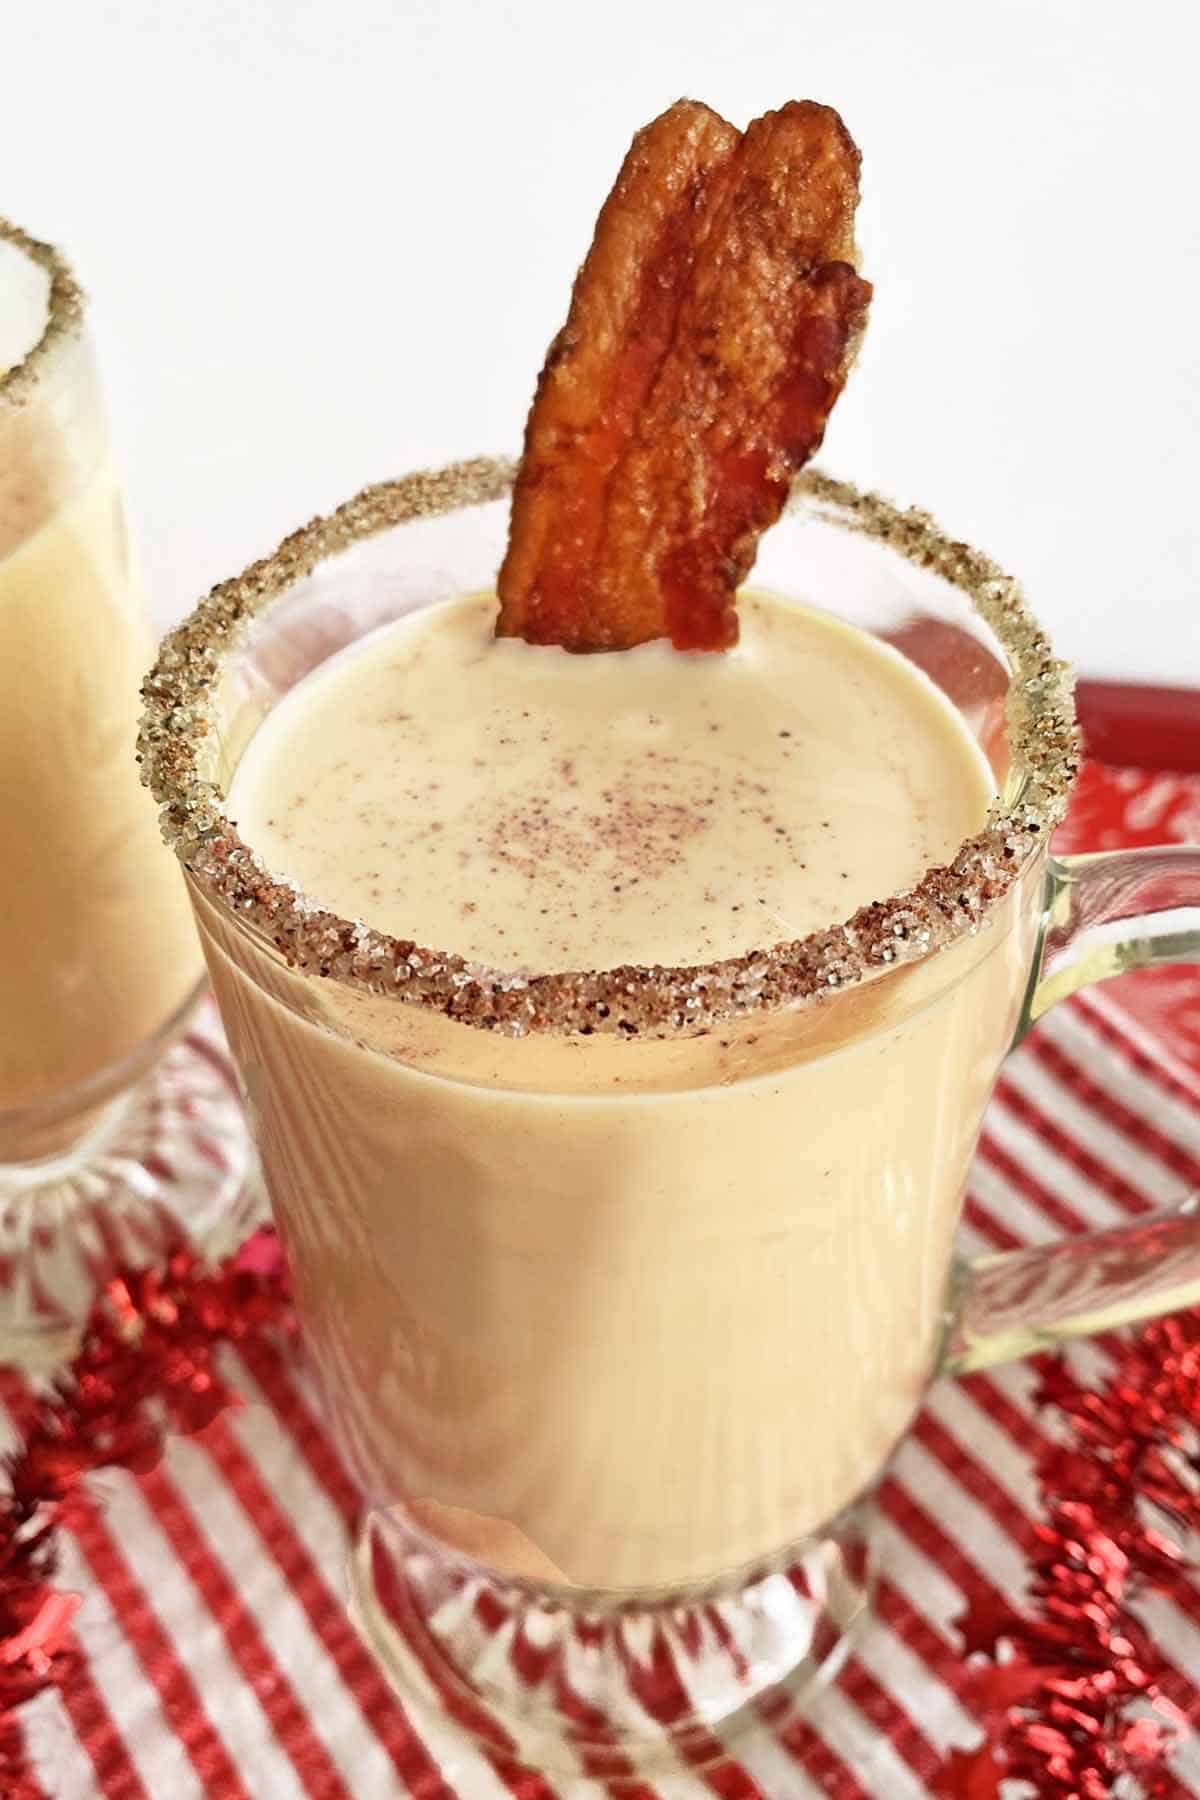 A glass mug filled with bourbon eggnog and topped with a strip of candied bacon, on a red and white napkin.